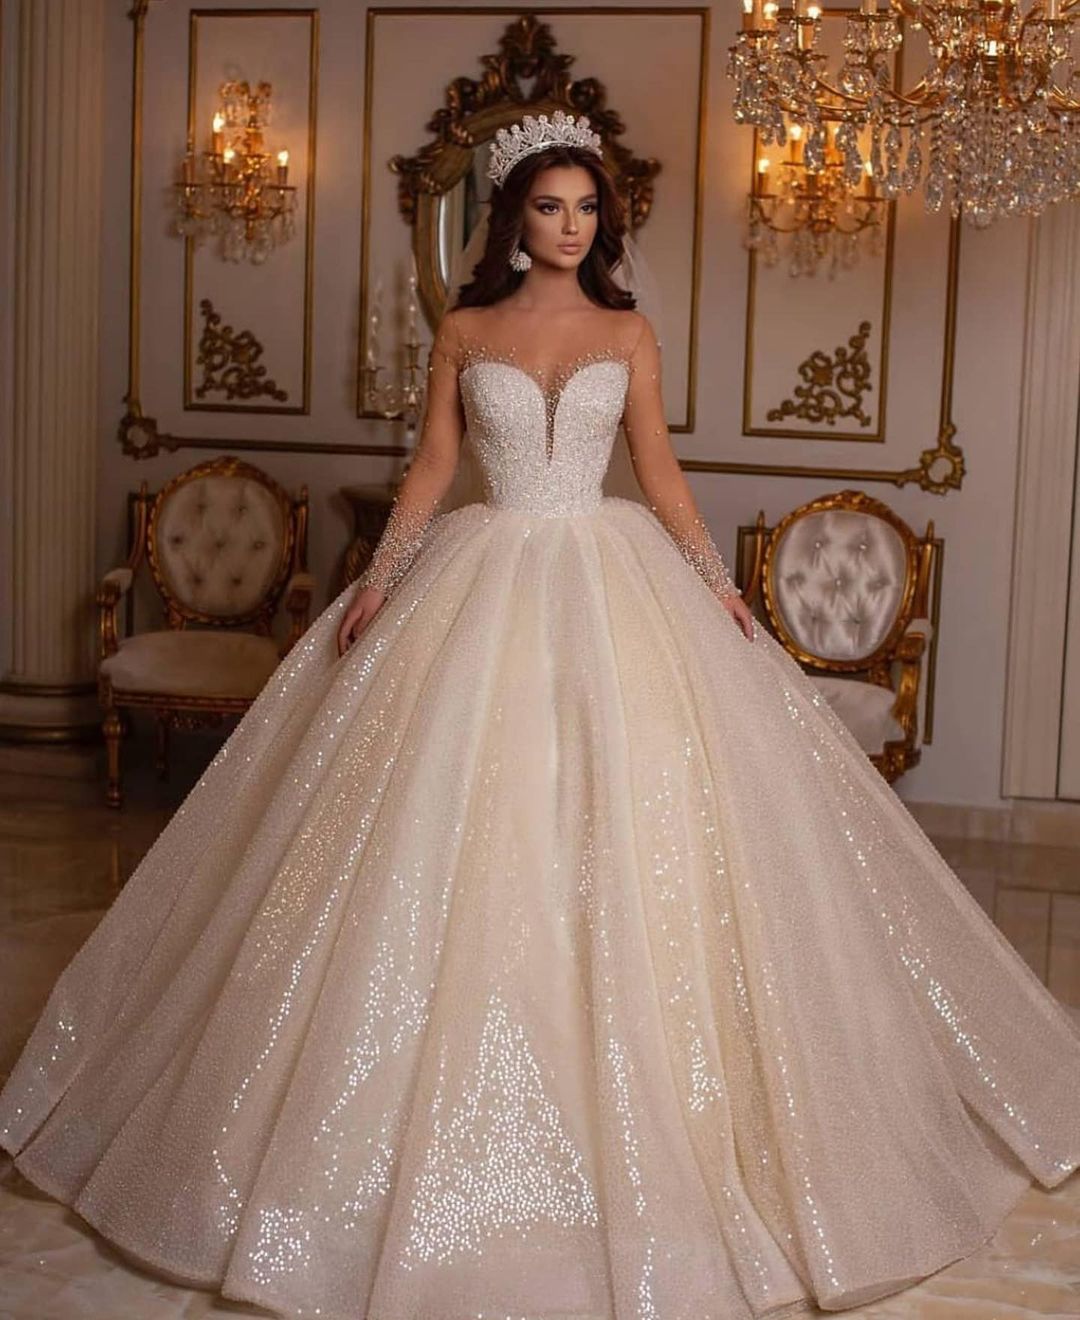 Luxury Ball Gowns Wedding Dresses | Sexy Spaghetti Straps Lace Bridal Gowns  | Newarrivaldress.com